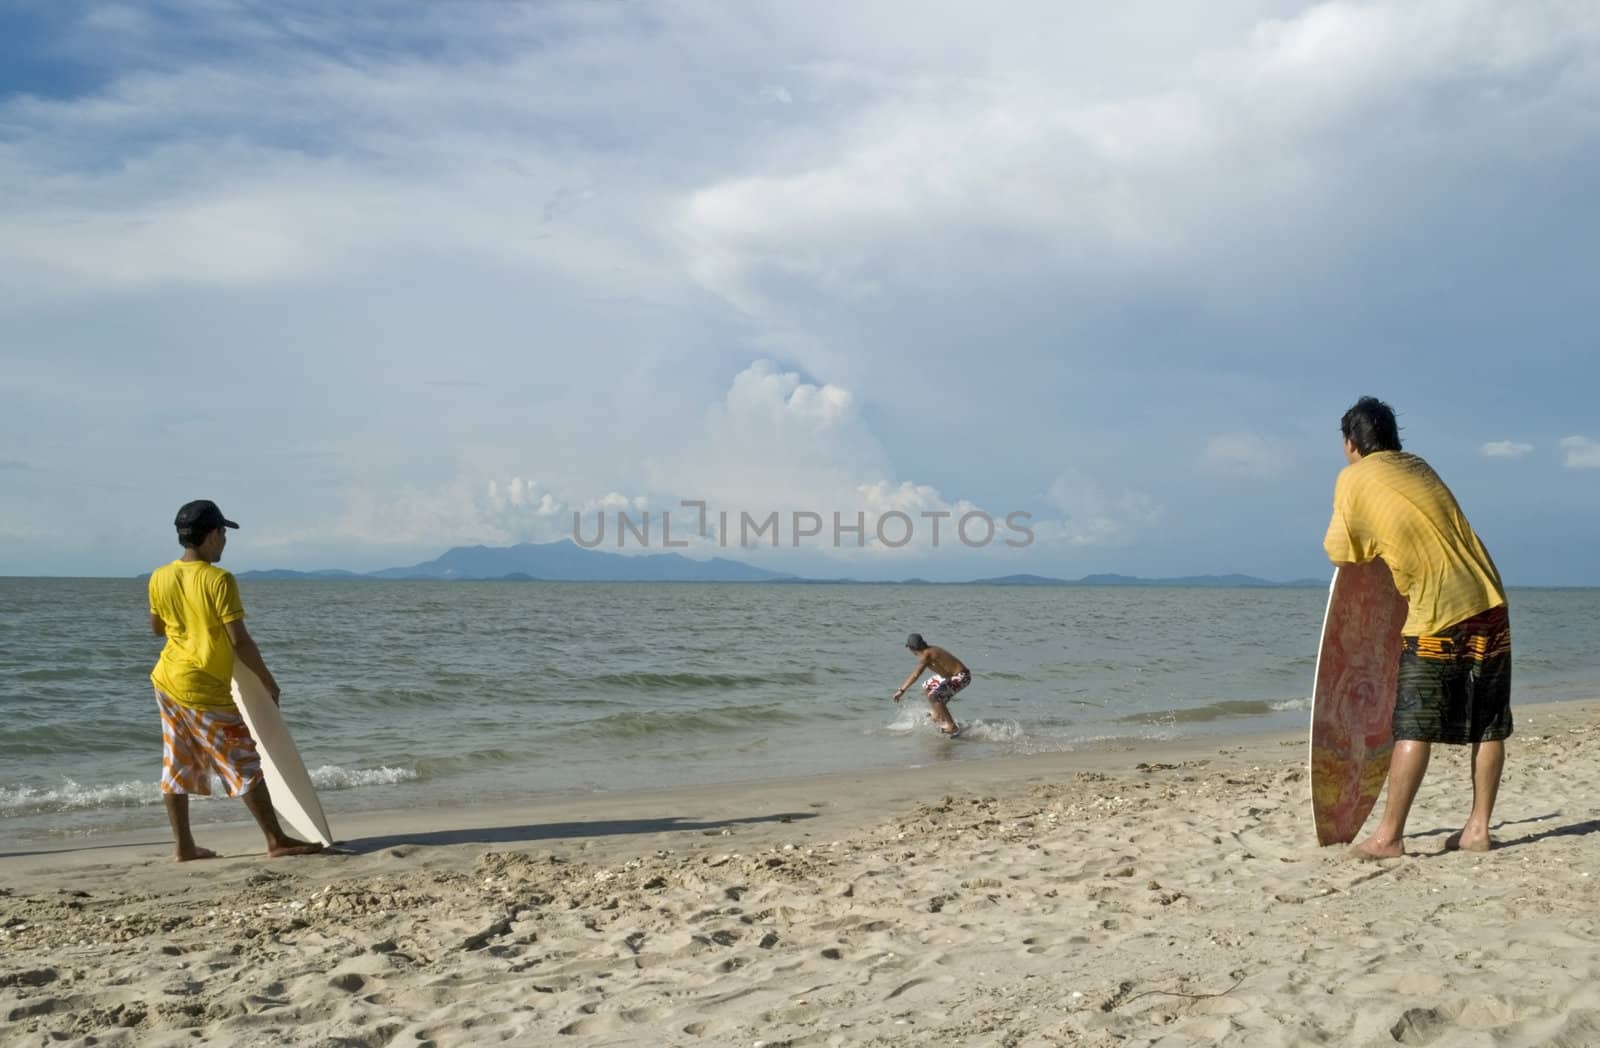 A young man skin boarding at the beach while his friends look on. 